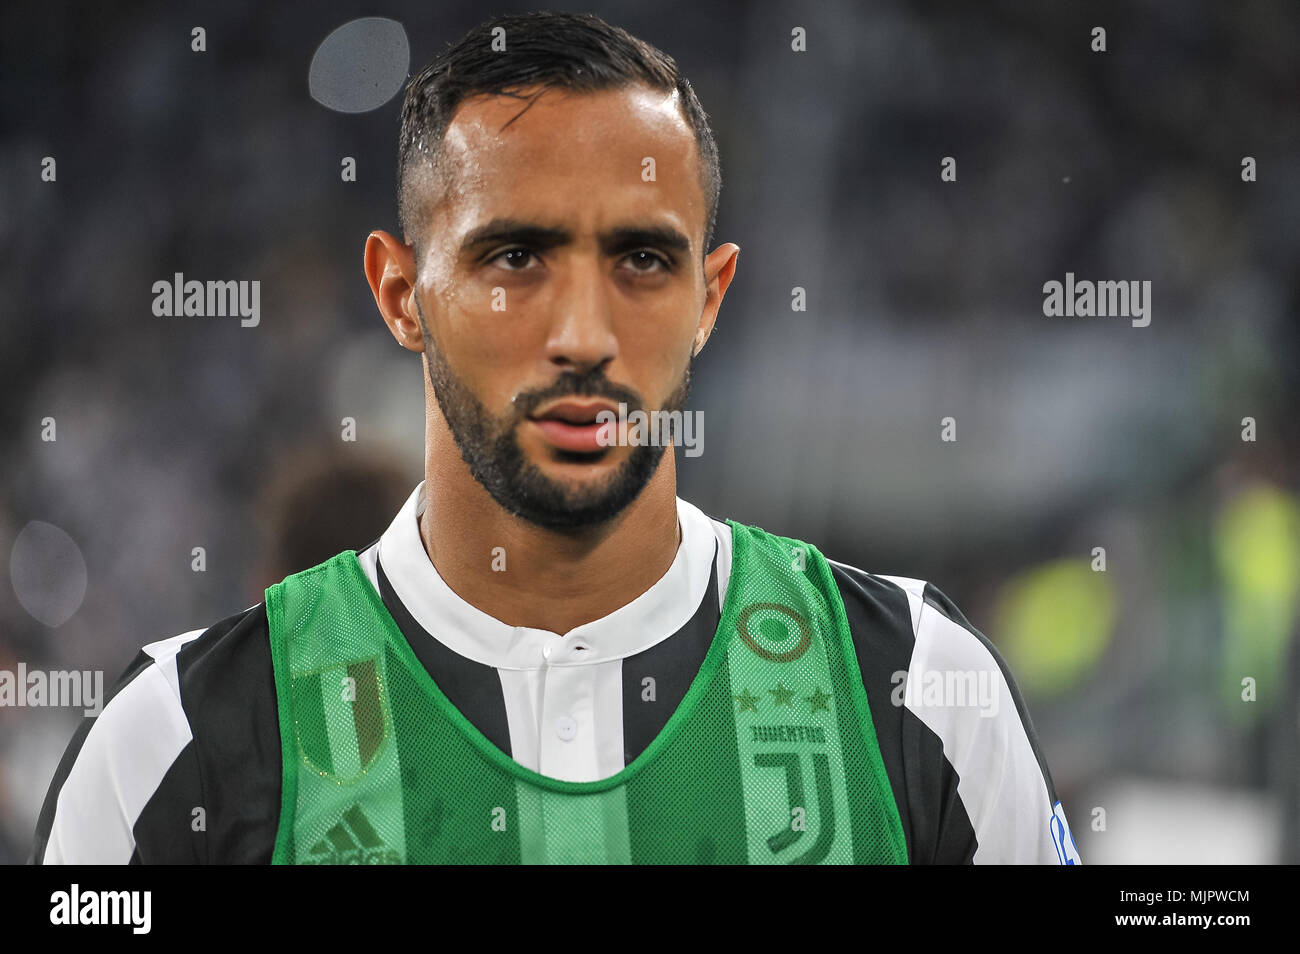 Turin, Italy, 5 May 2018. Mehdi Benatia (Juventus FC) during the Serie A football match between Juventus FC and Bologna FC at Allianz Stadium on 5th May, 2018 in Turin, Italy. Credit: FABIO PETROSINO/Alamy Live News Stock Photo